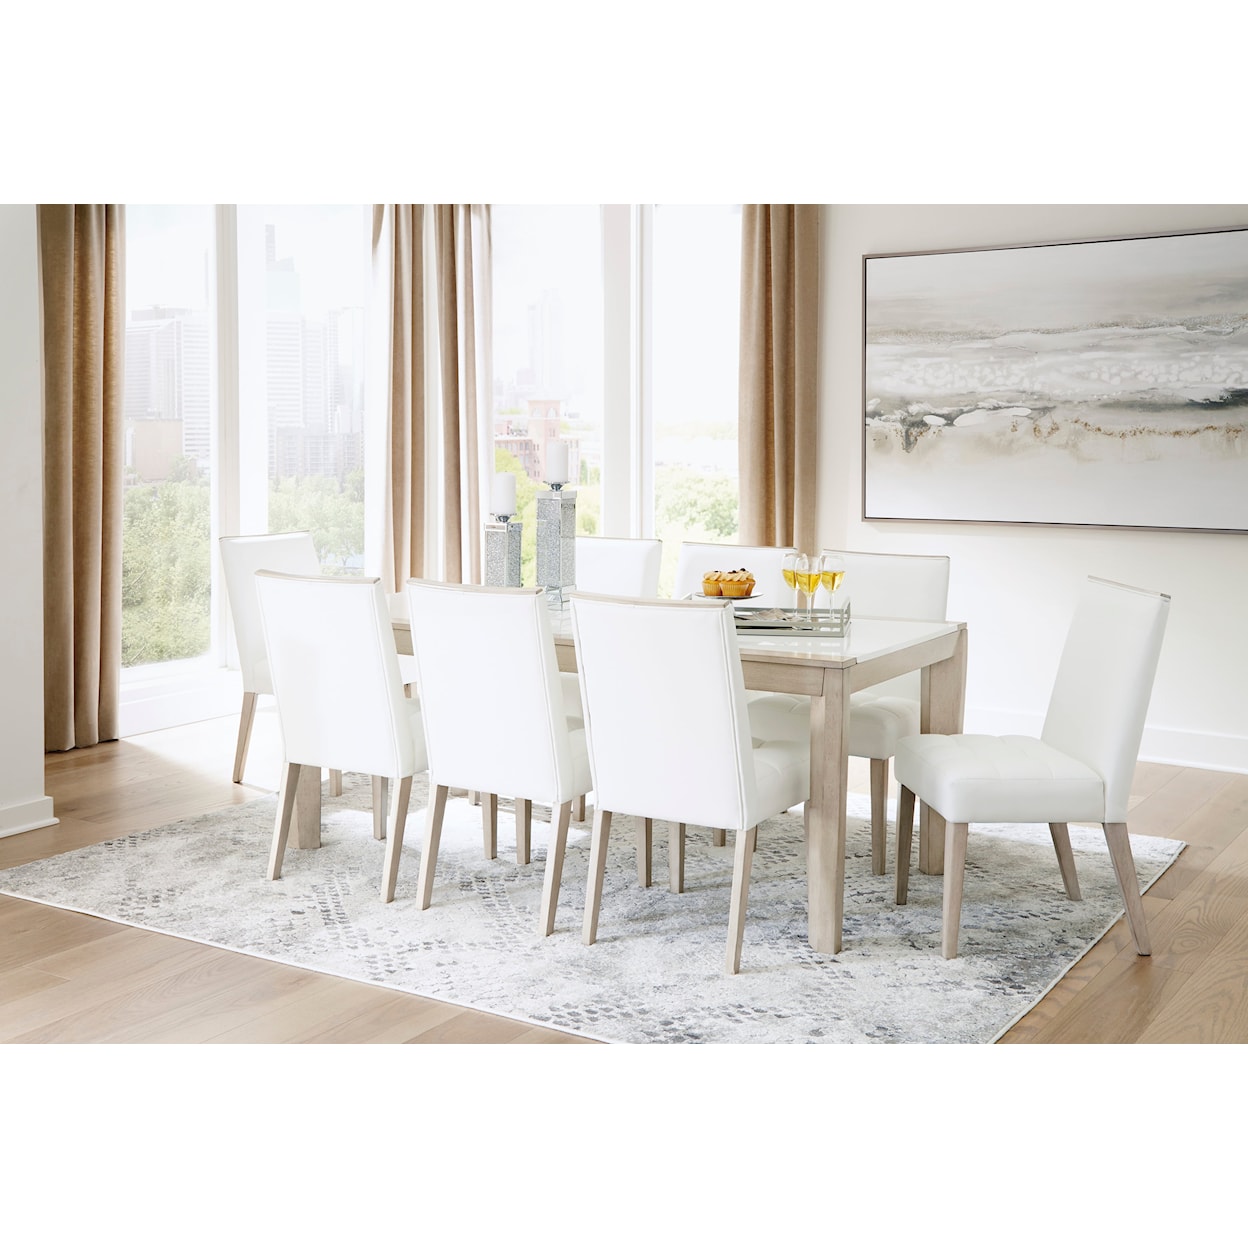 Signature Wendora Table and 8 Chair Dining Set